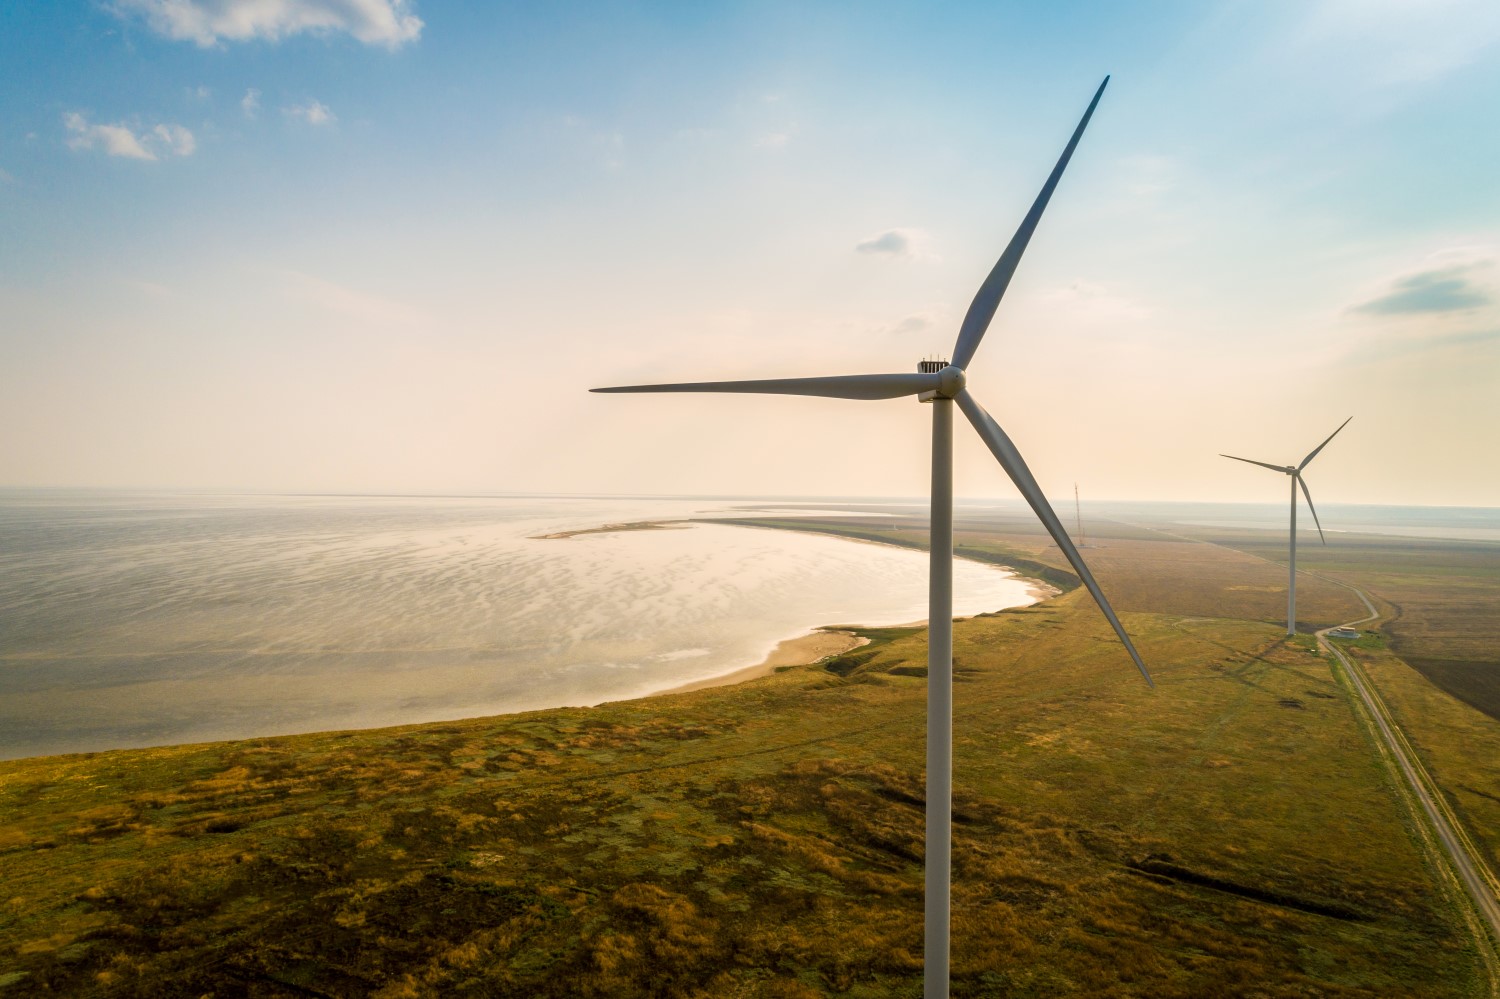 Aerial view of wind turbines on a sea shore.